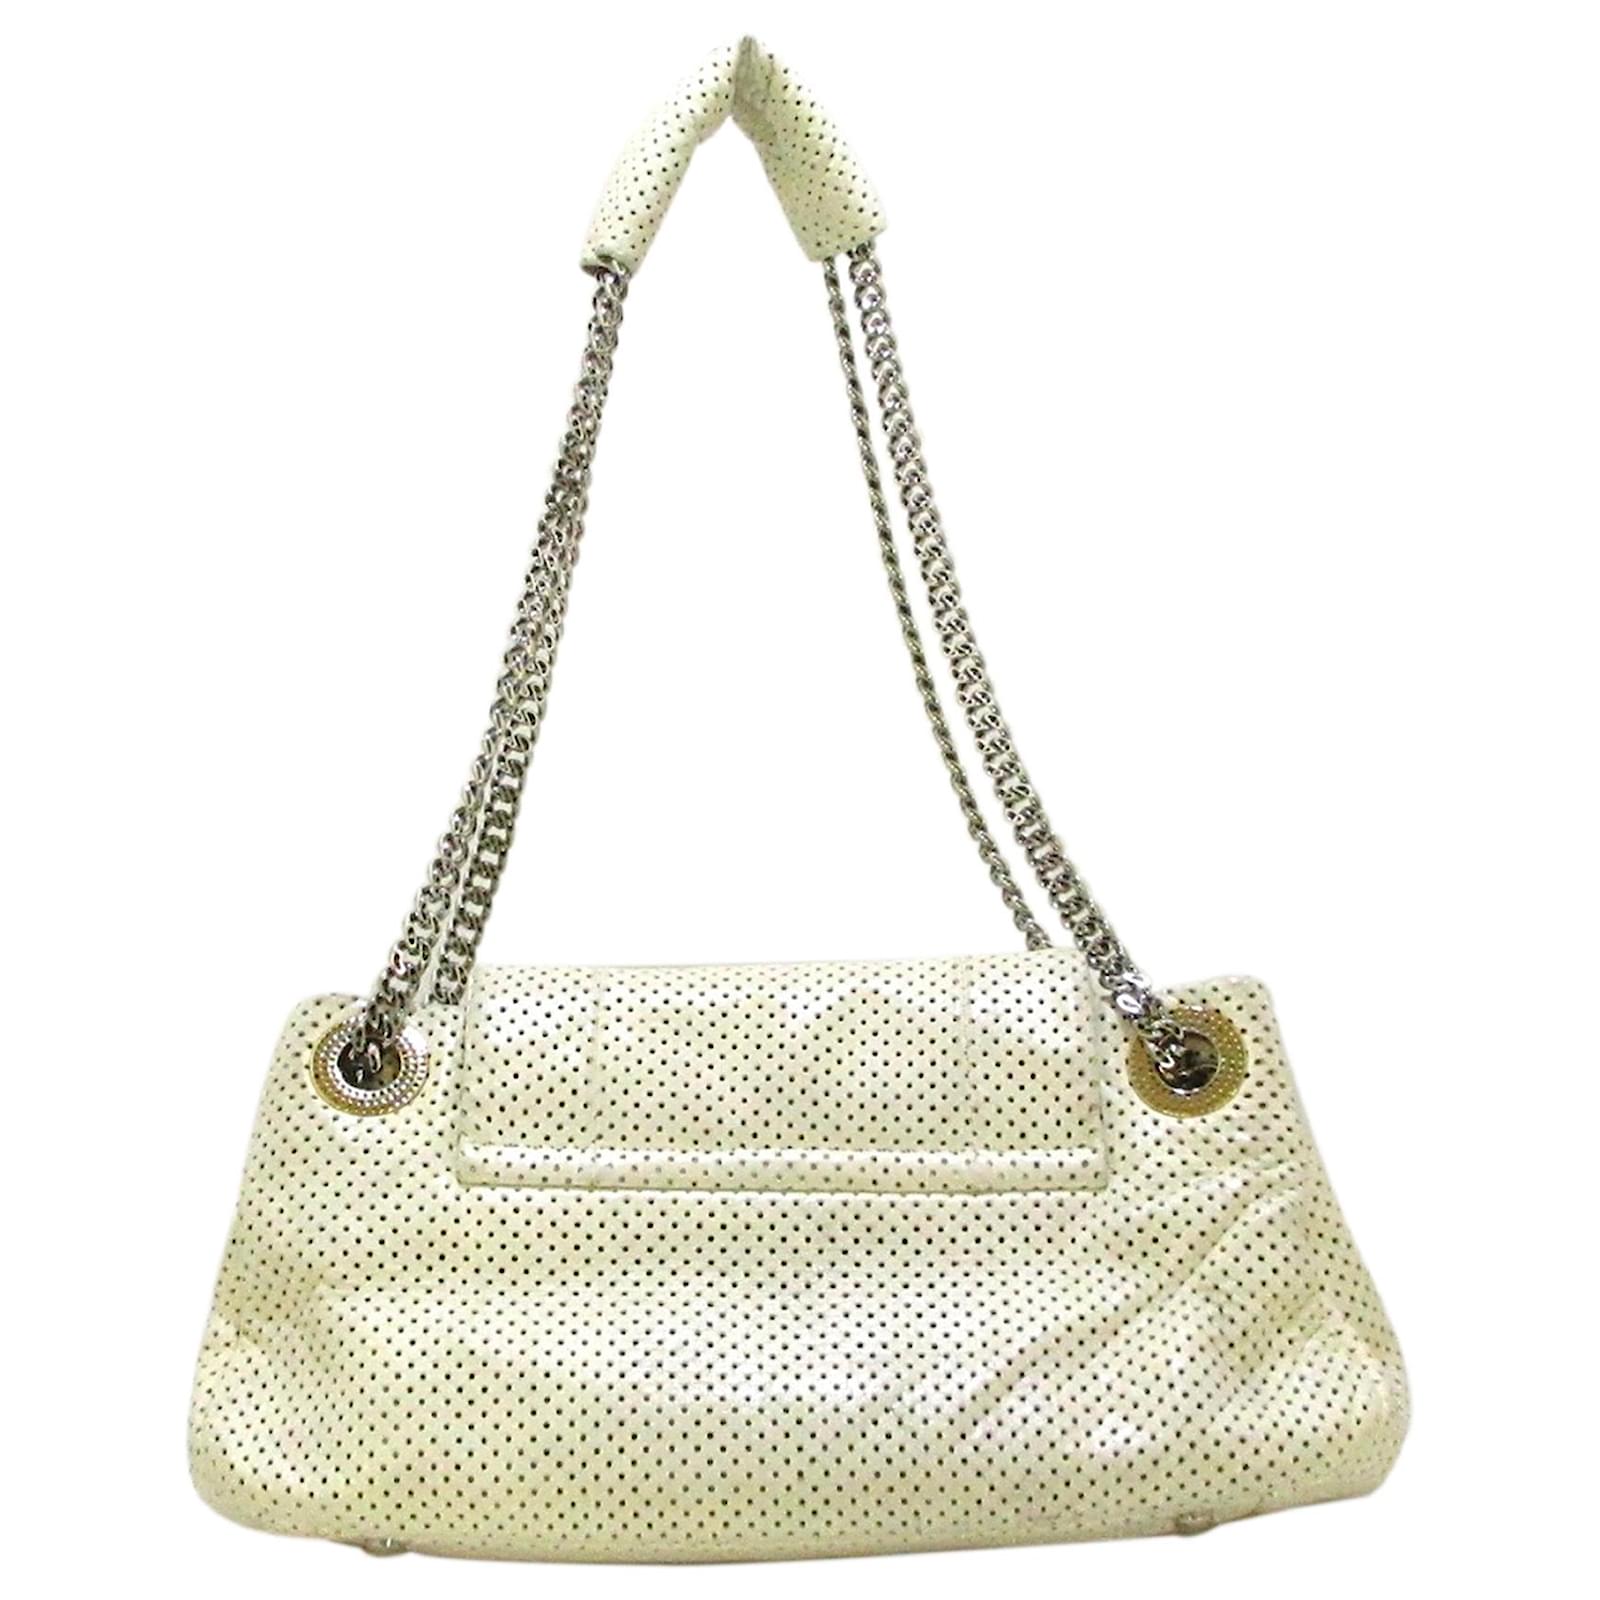 Chanel White Perforated Leather Accordion Flap Bag Chanel